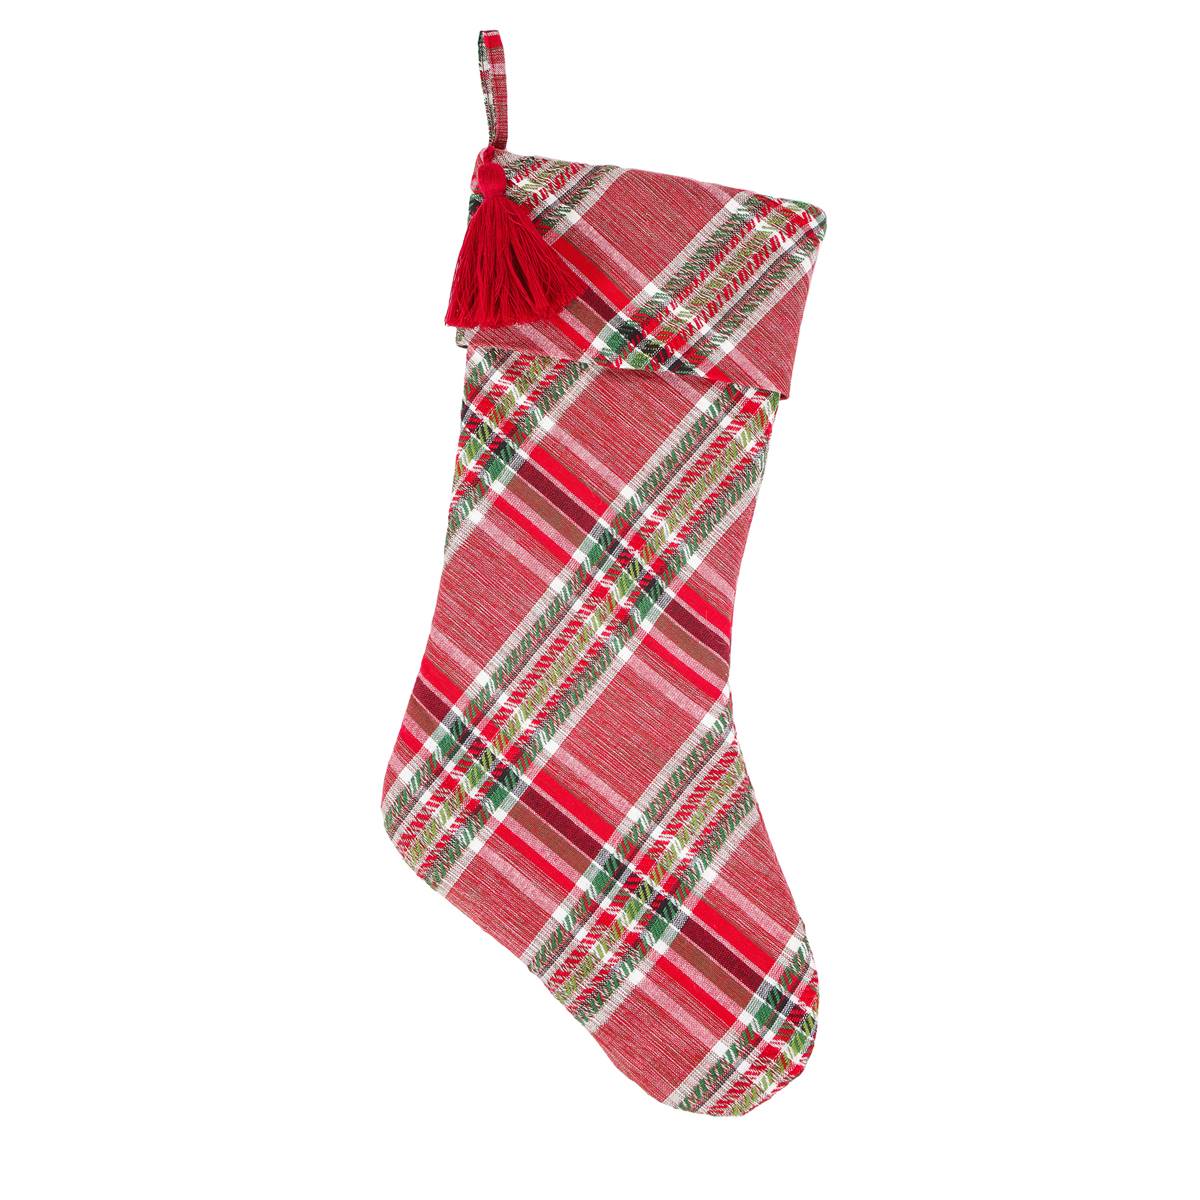 National Tree 20in. Red Cotton Biased Cut Plaid Stocking